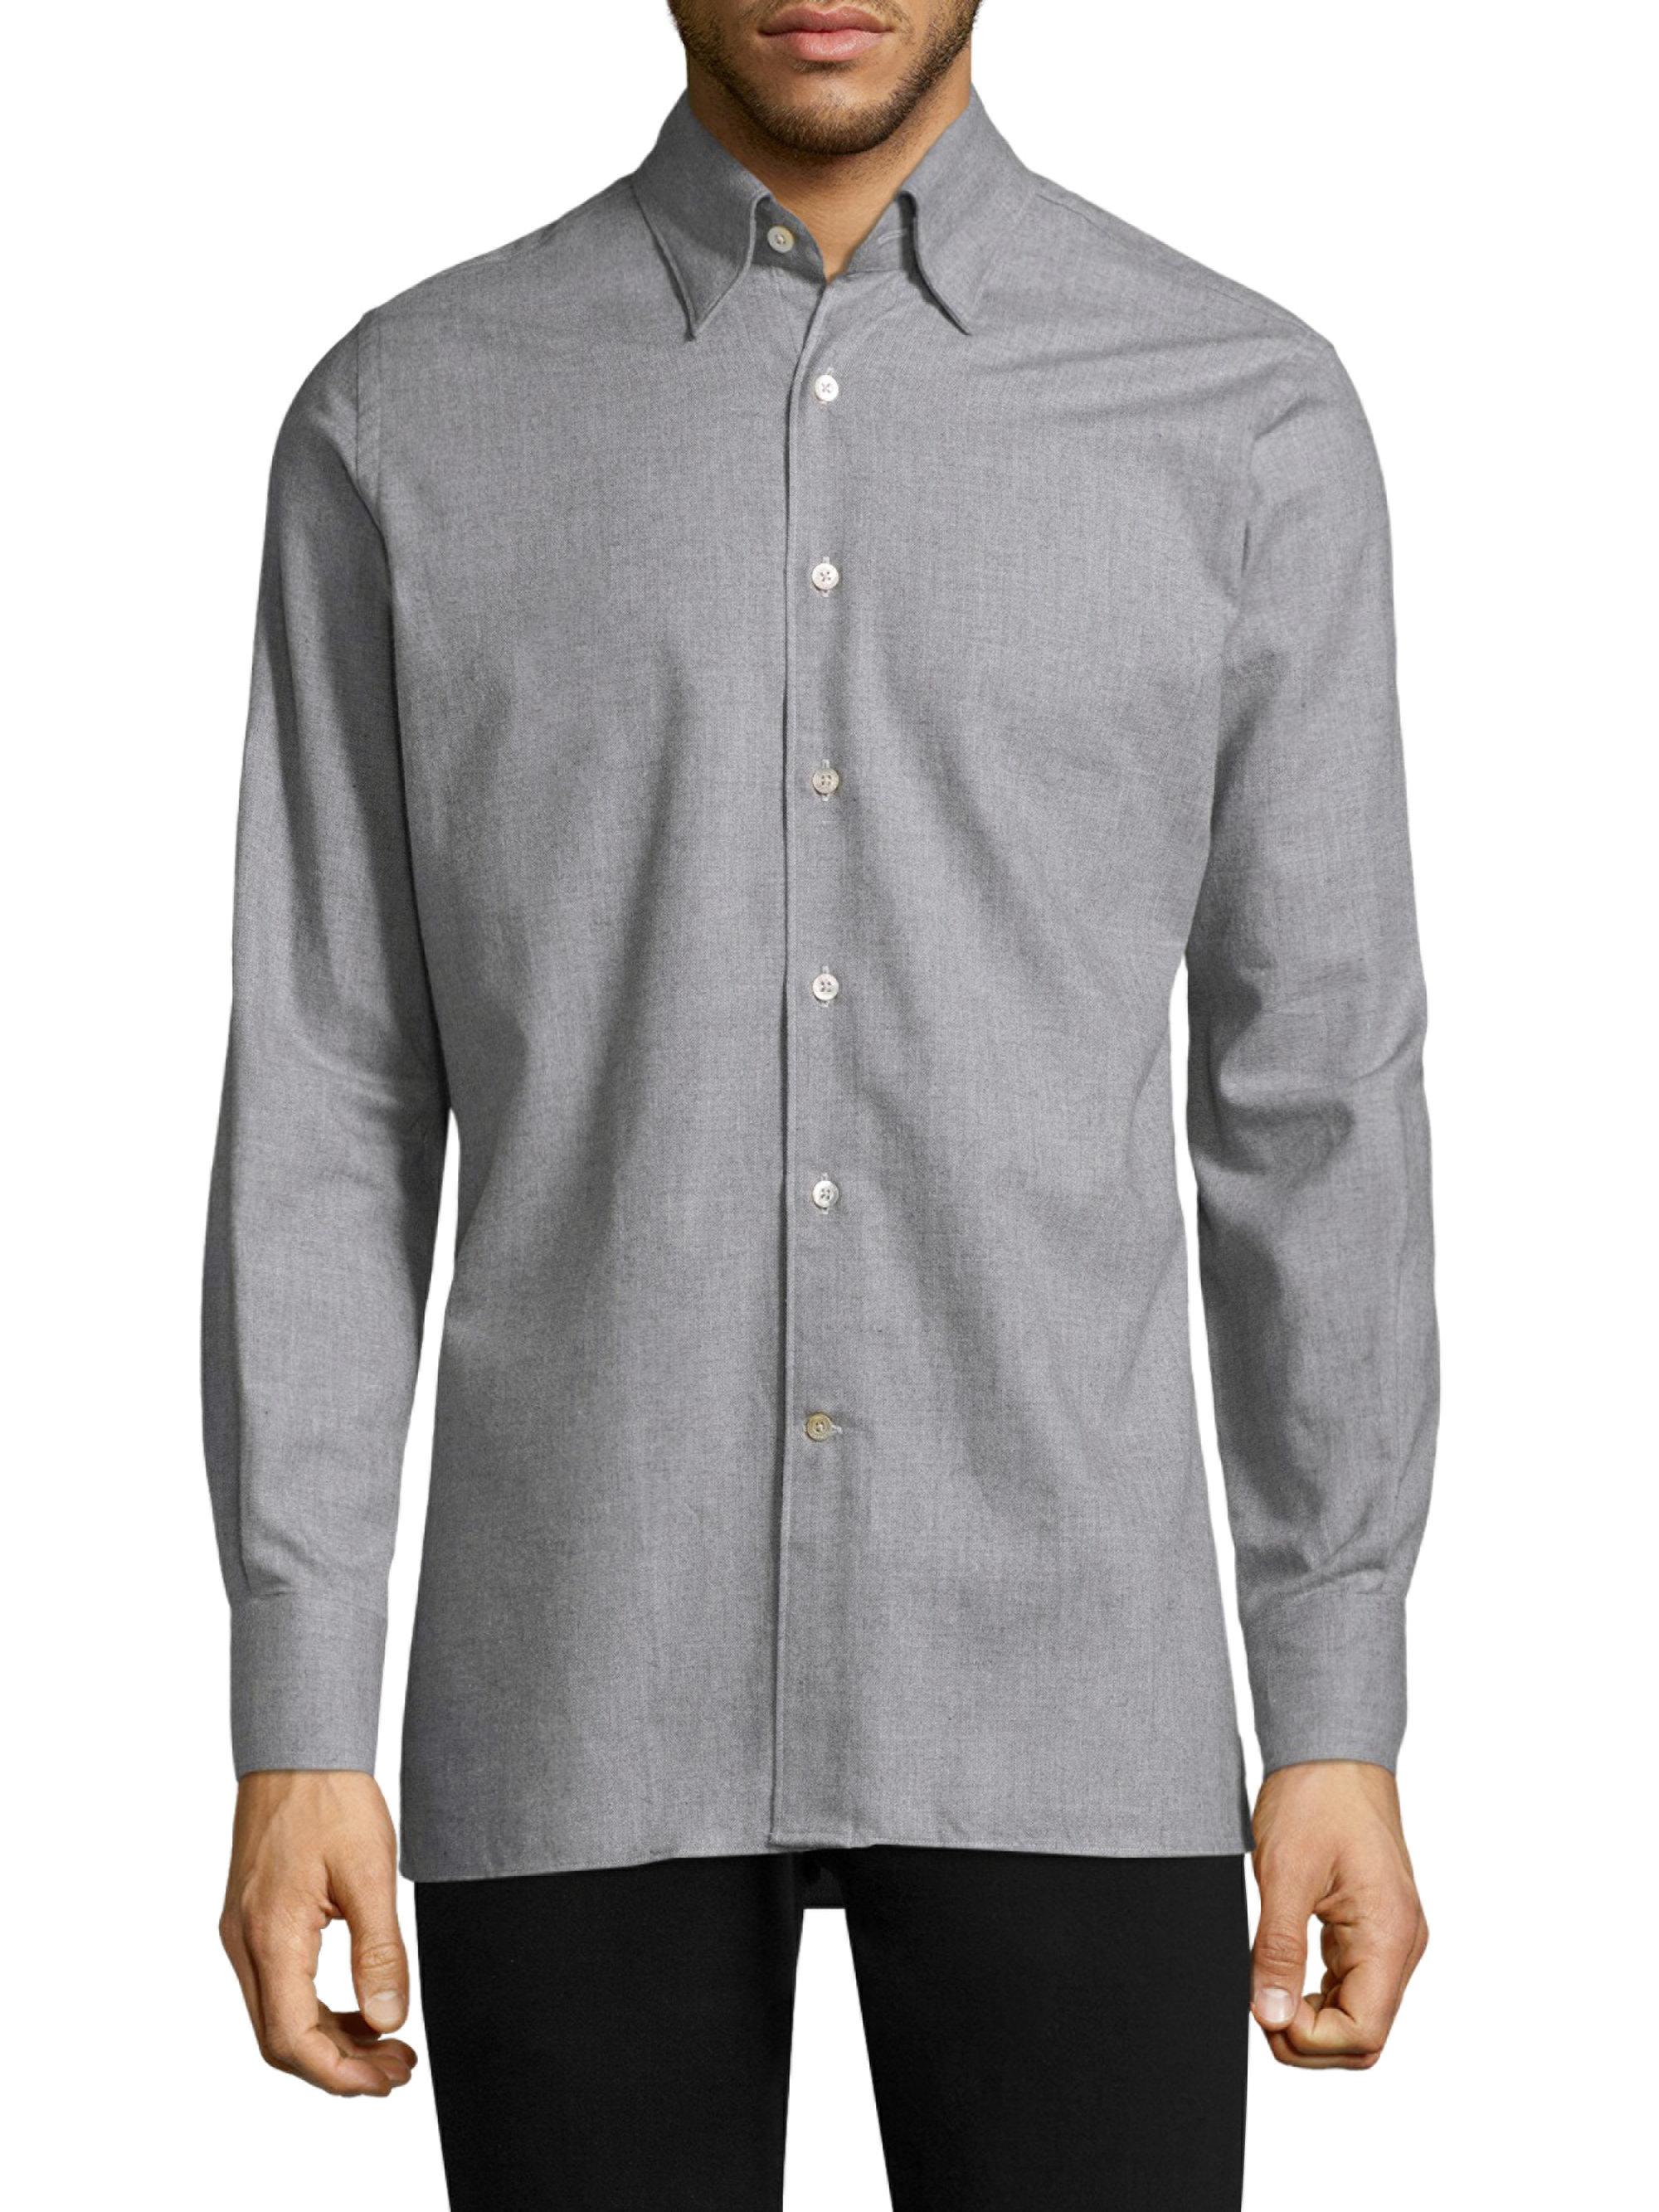 Lyst - Canali Cotton Casual Button-down Shirt in Gray for Men